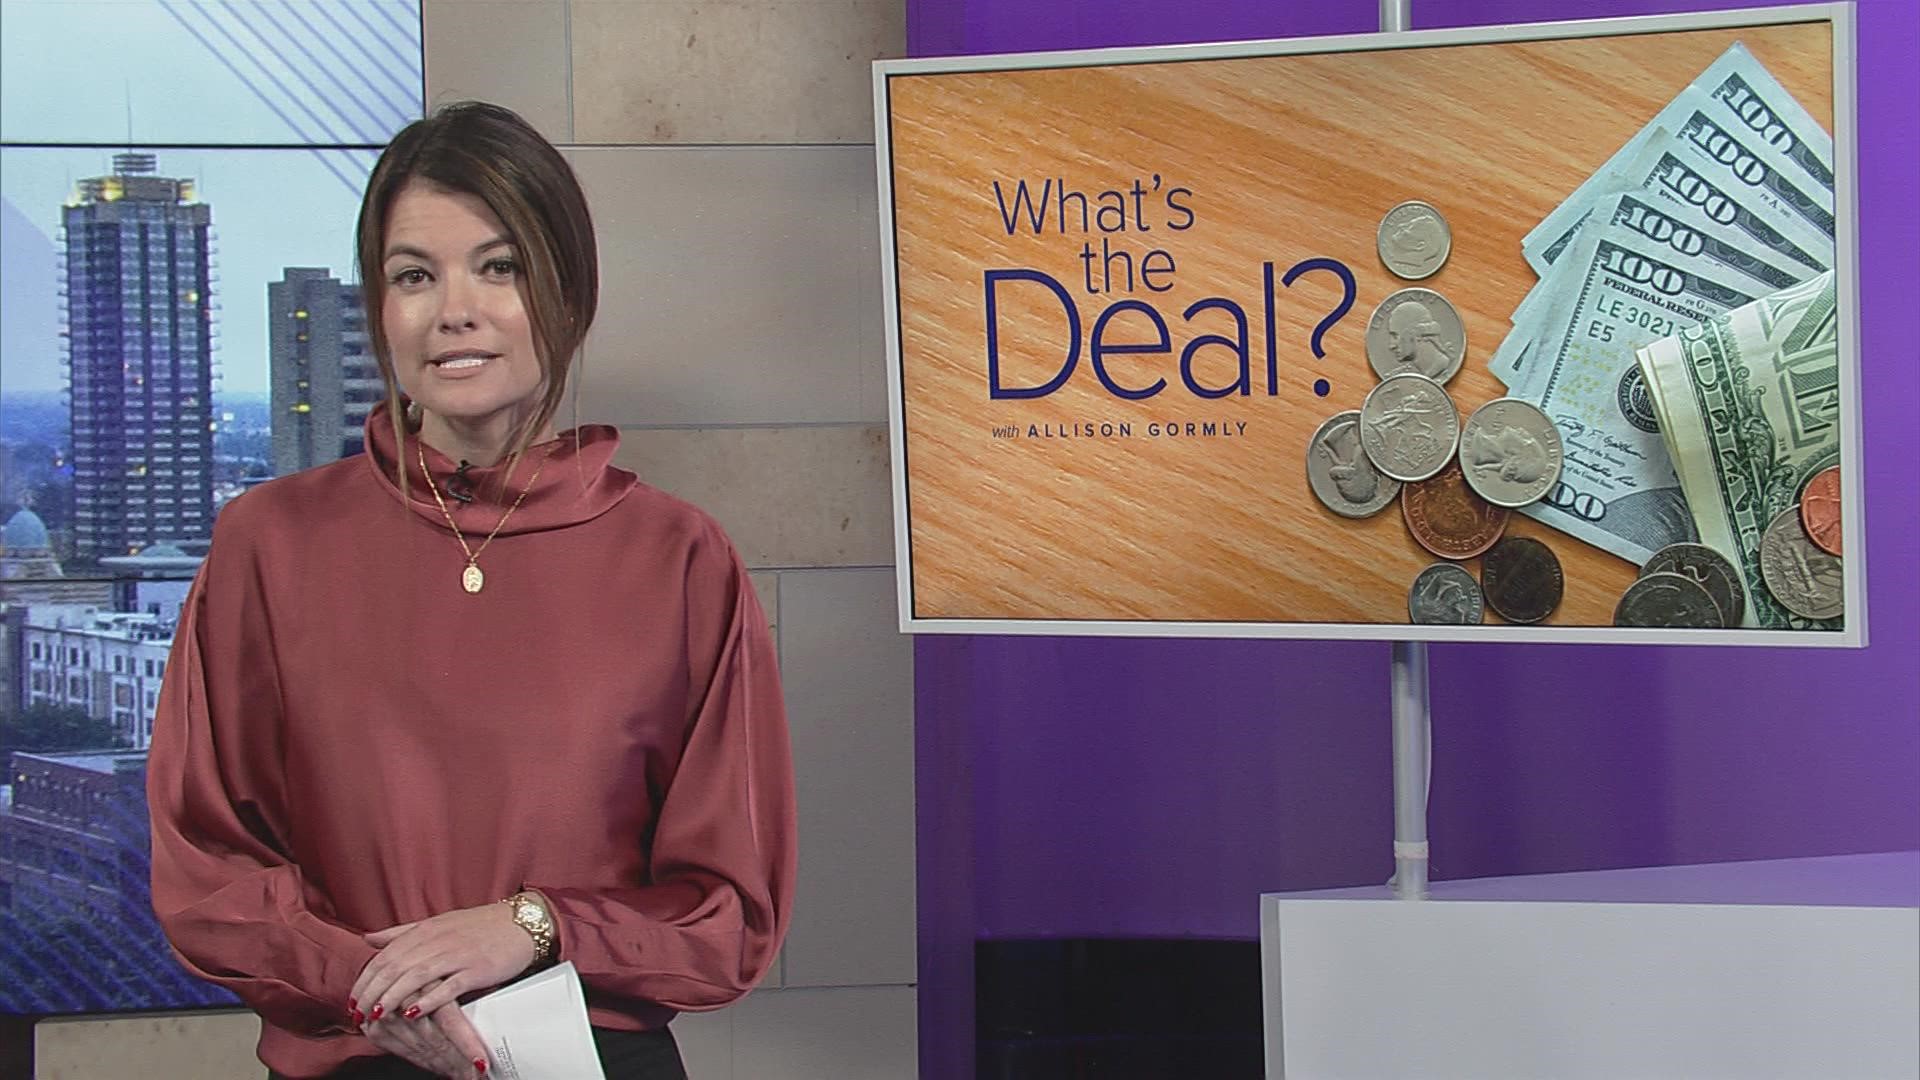 Allison Gormly is here to tell us What's the Deal.